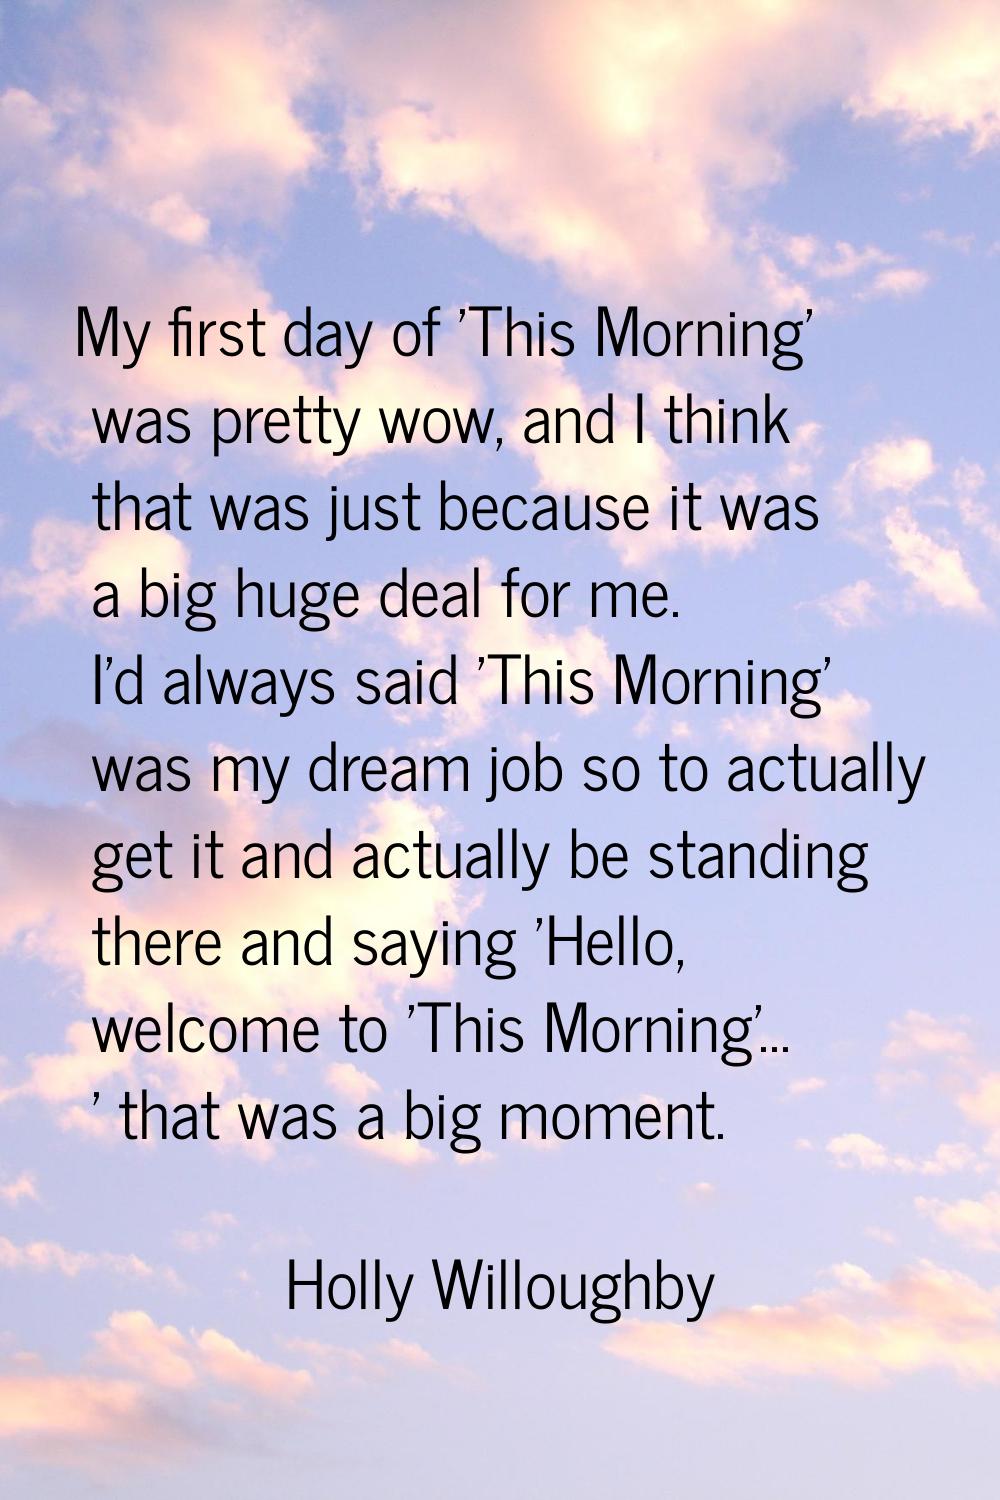 My first day of 'This Morning' was pretty wow, and I think that was just because it was a big huge 